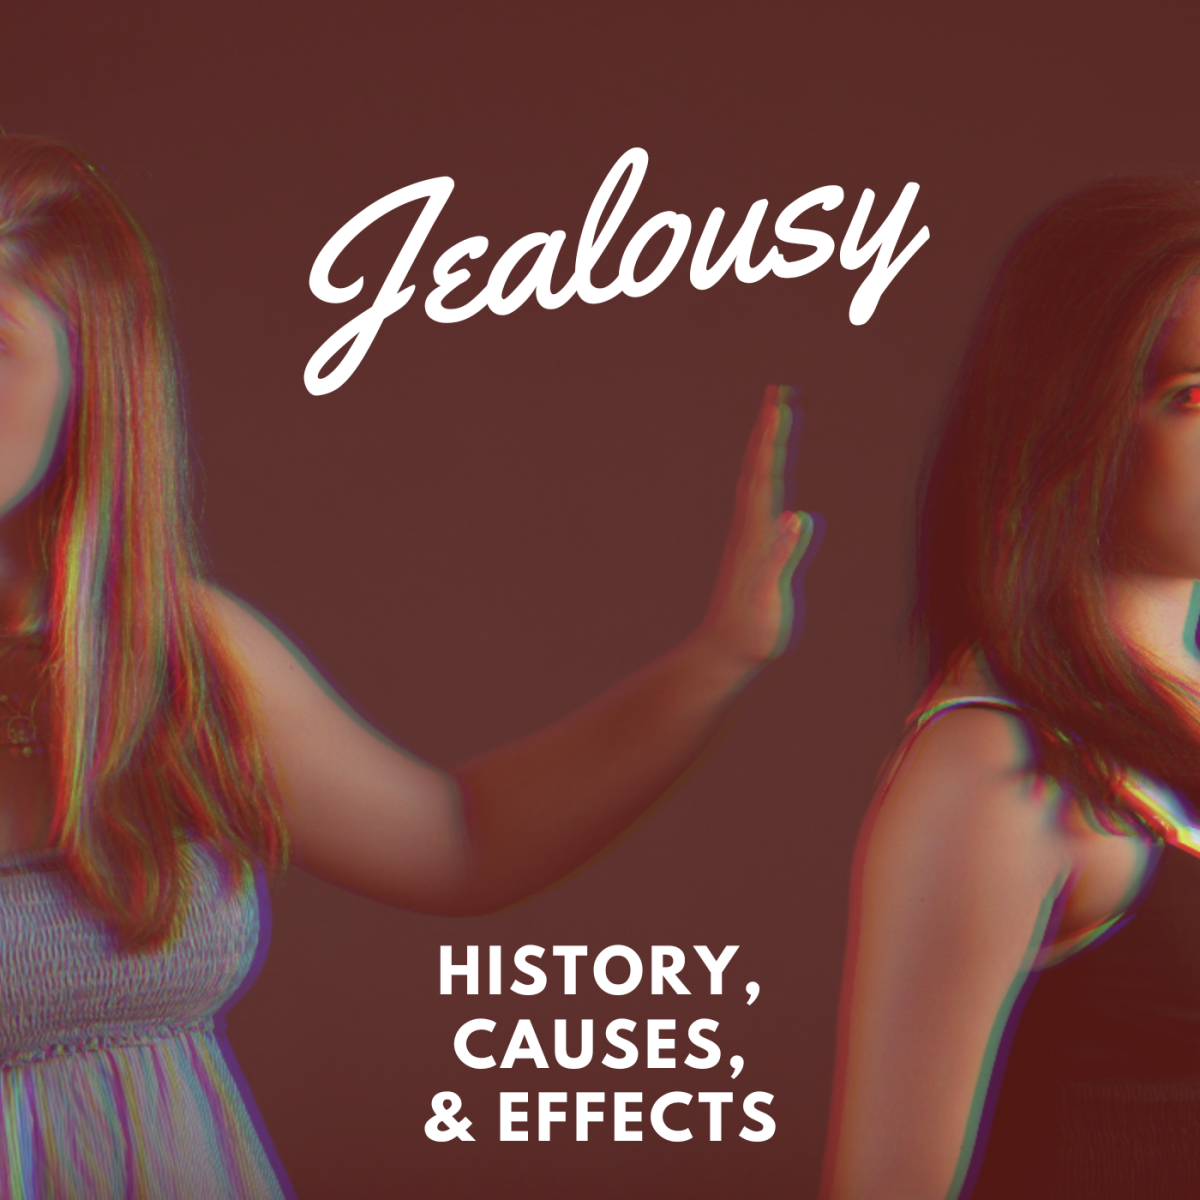 History, causes, and effects of jealousy.